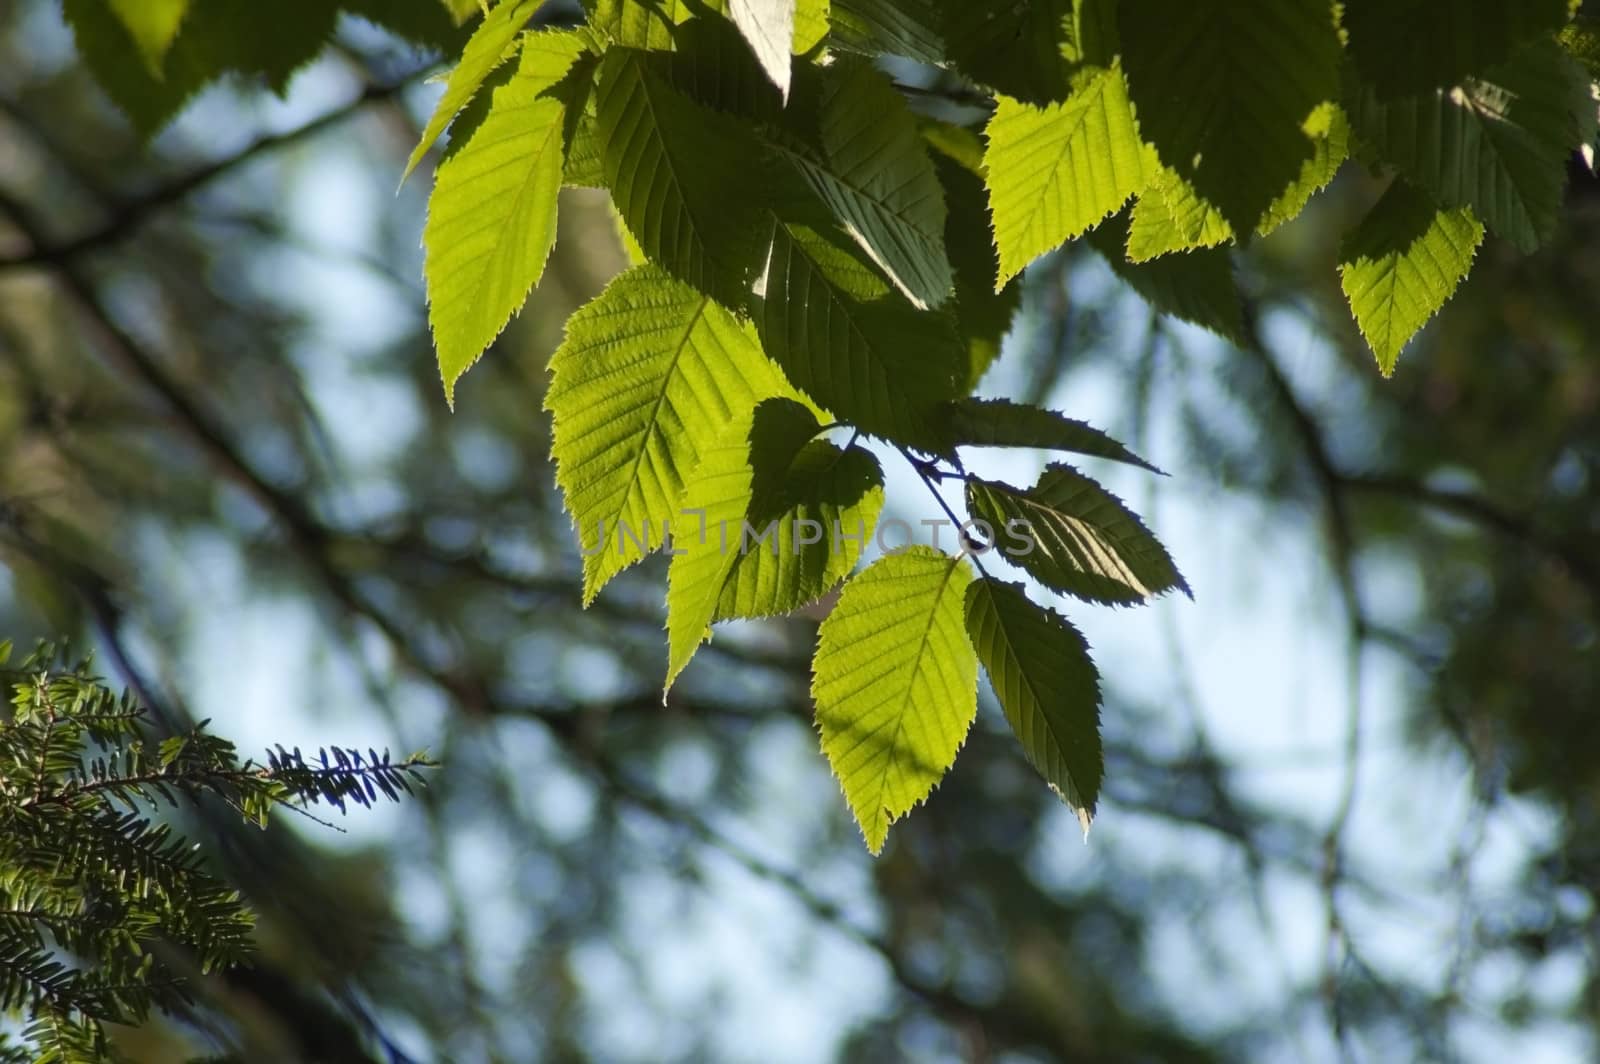 Birch leaves by PavelS